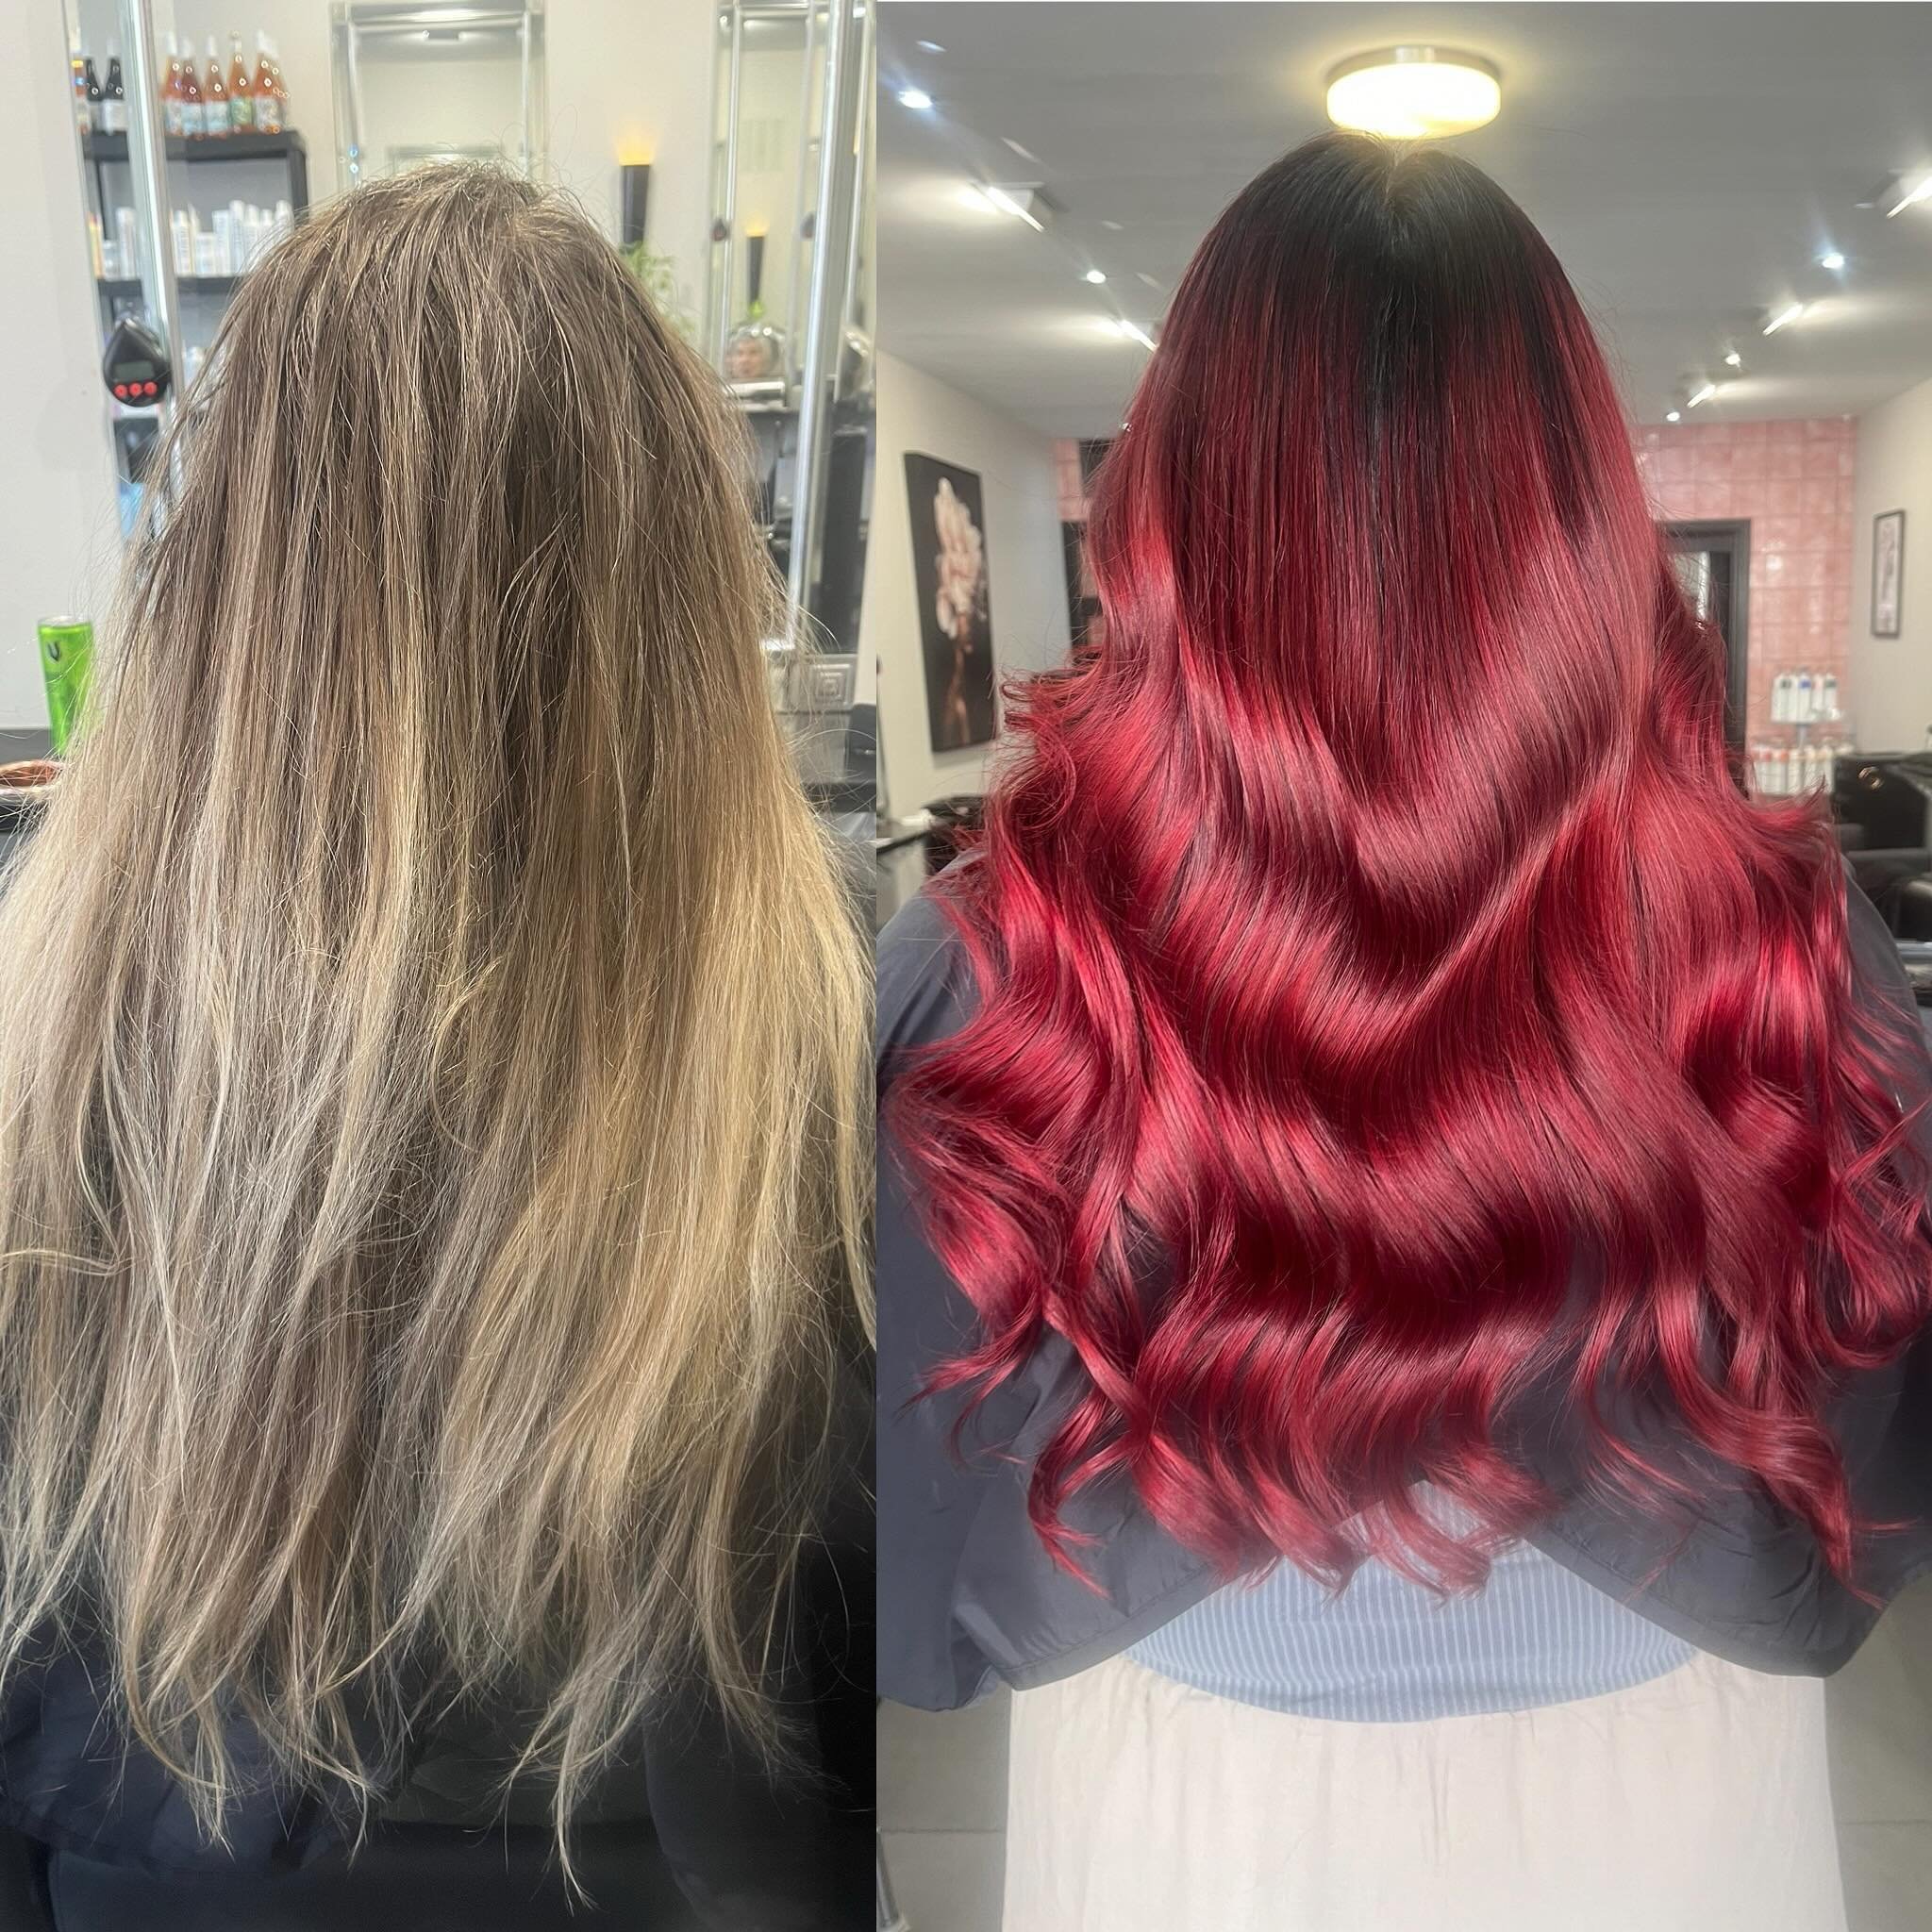 This colour turned out incredibly using @pravana.australia @evolvehairconcepts foils Pure light 20vol foils 3nt hydragloss roots, red vivids on the ends and at basin over foils #pravana #colourist #colorist #haircolourist #haircolorist #hairdresser #